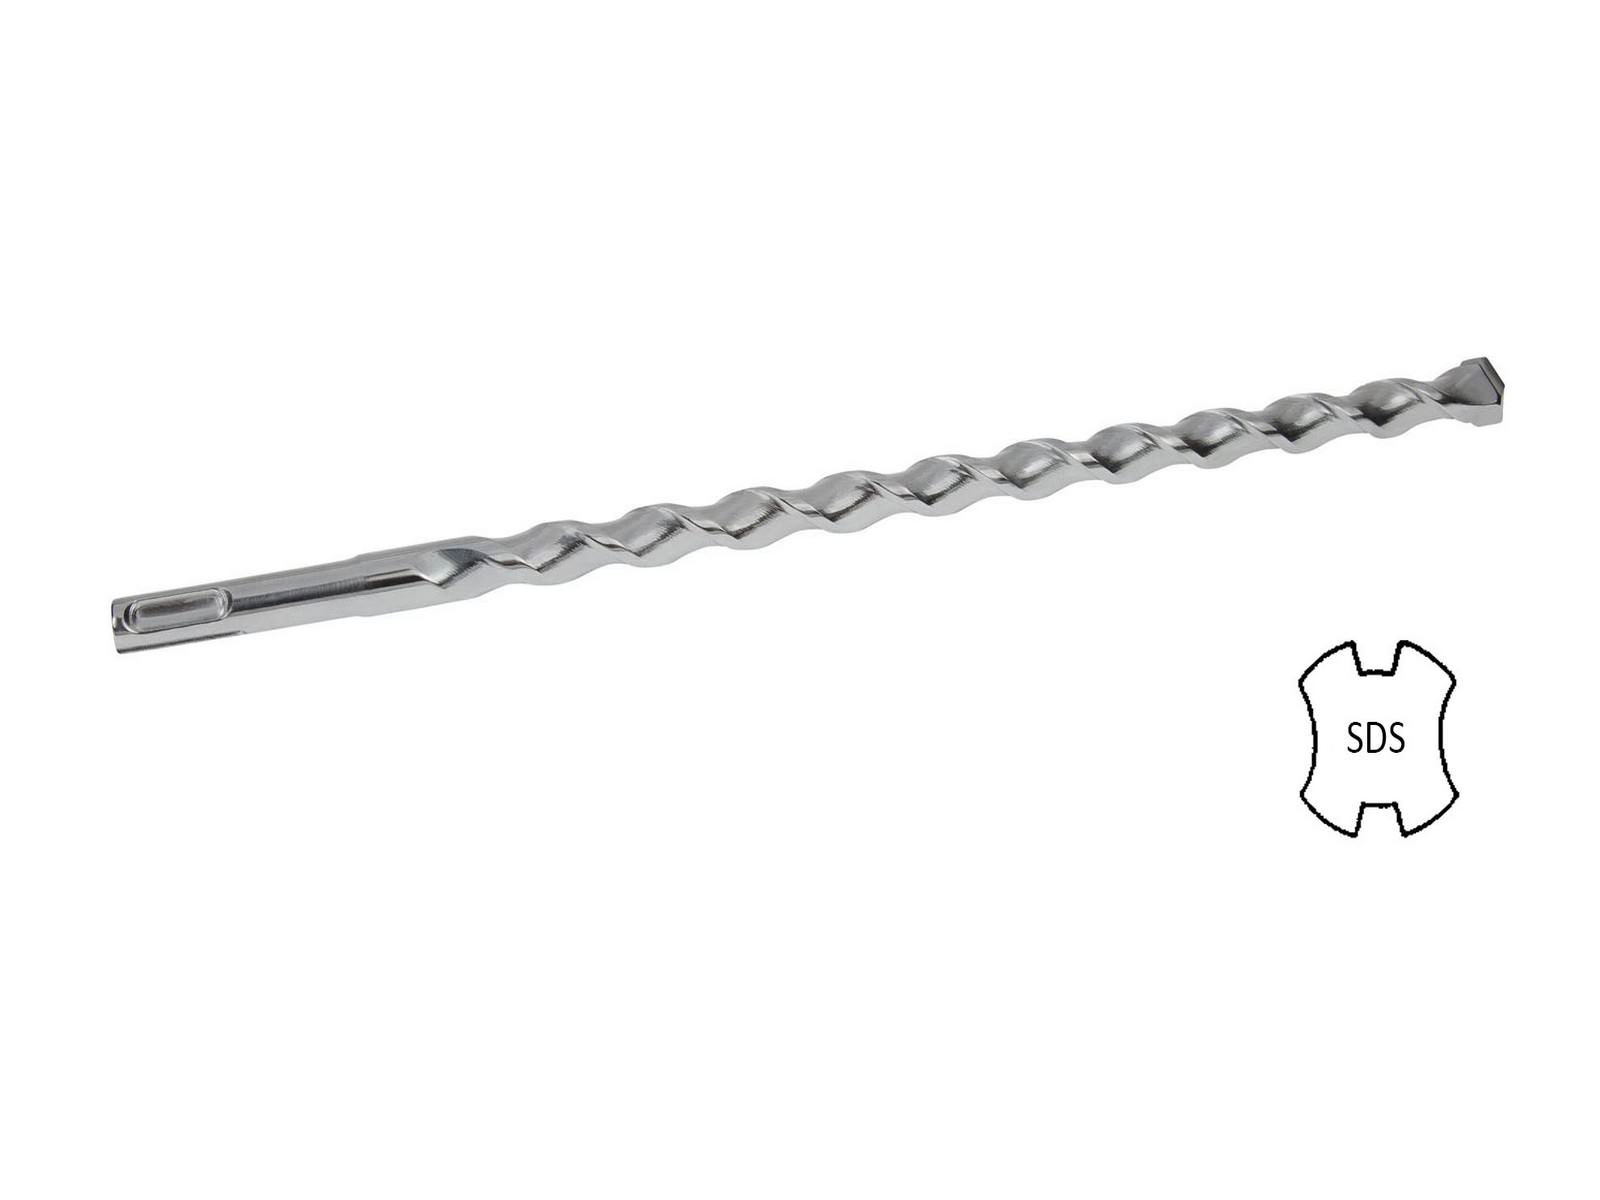 CONFAST 1/2 Inside/Screw 1/2 Diameter 316 Stainless Steel Drop-in Anchor with 1 Setting Tool 50 per Box 